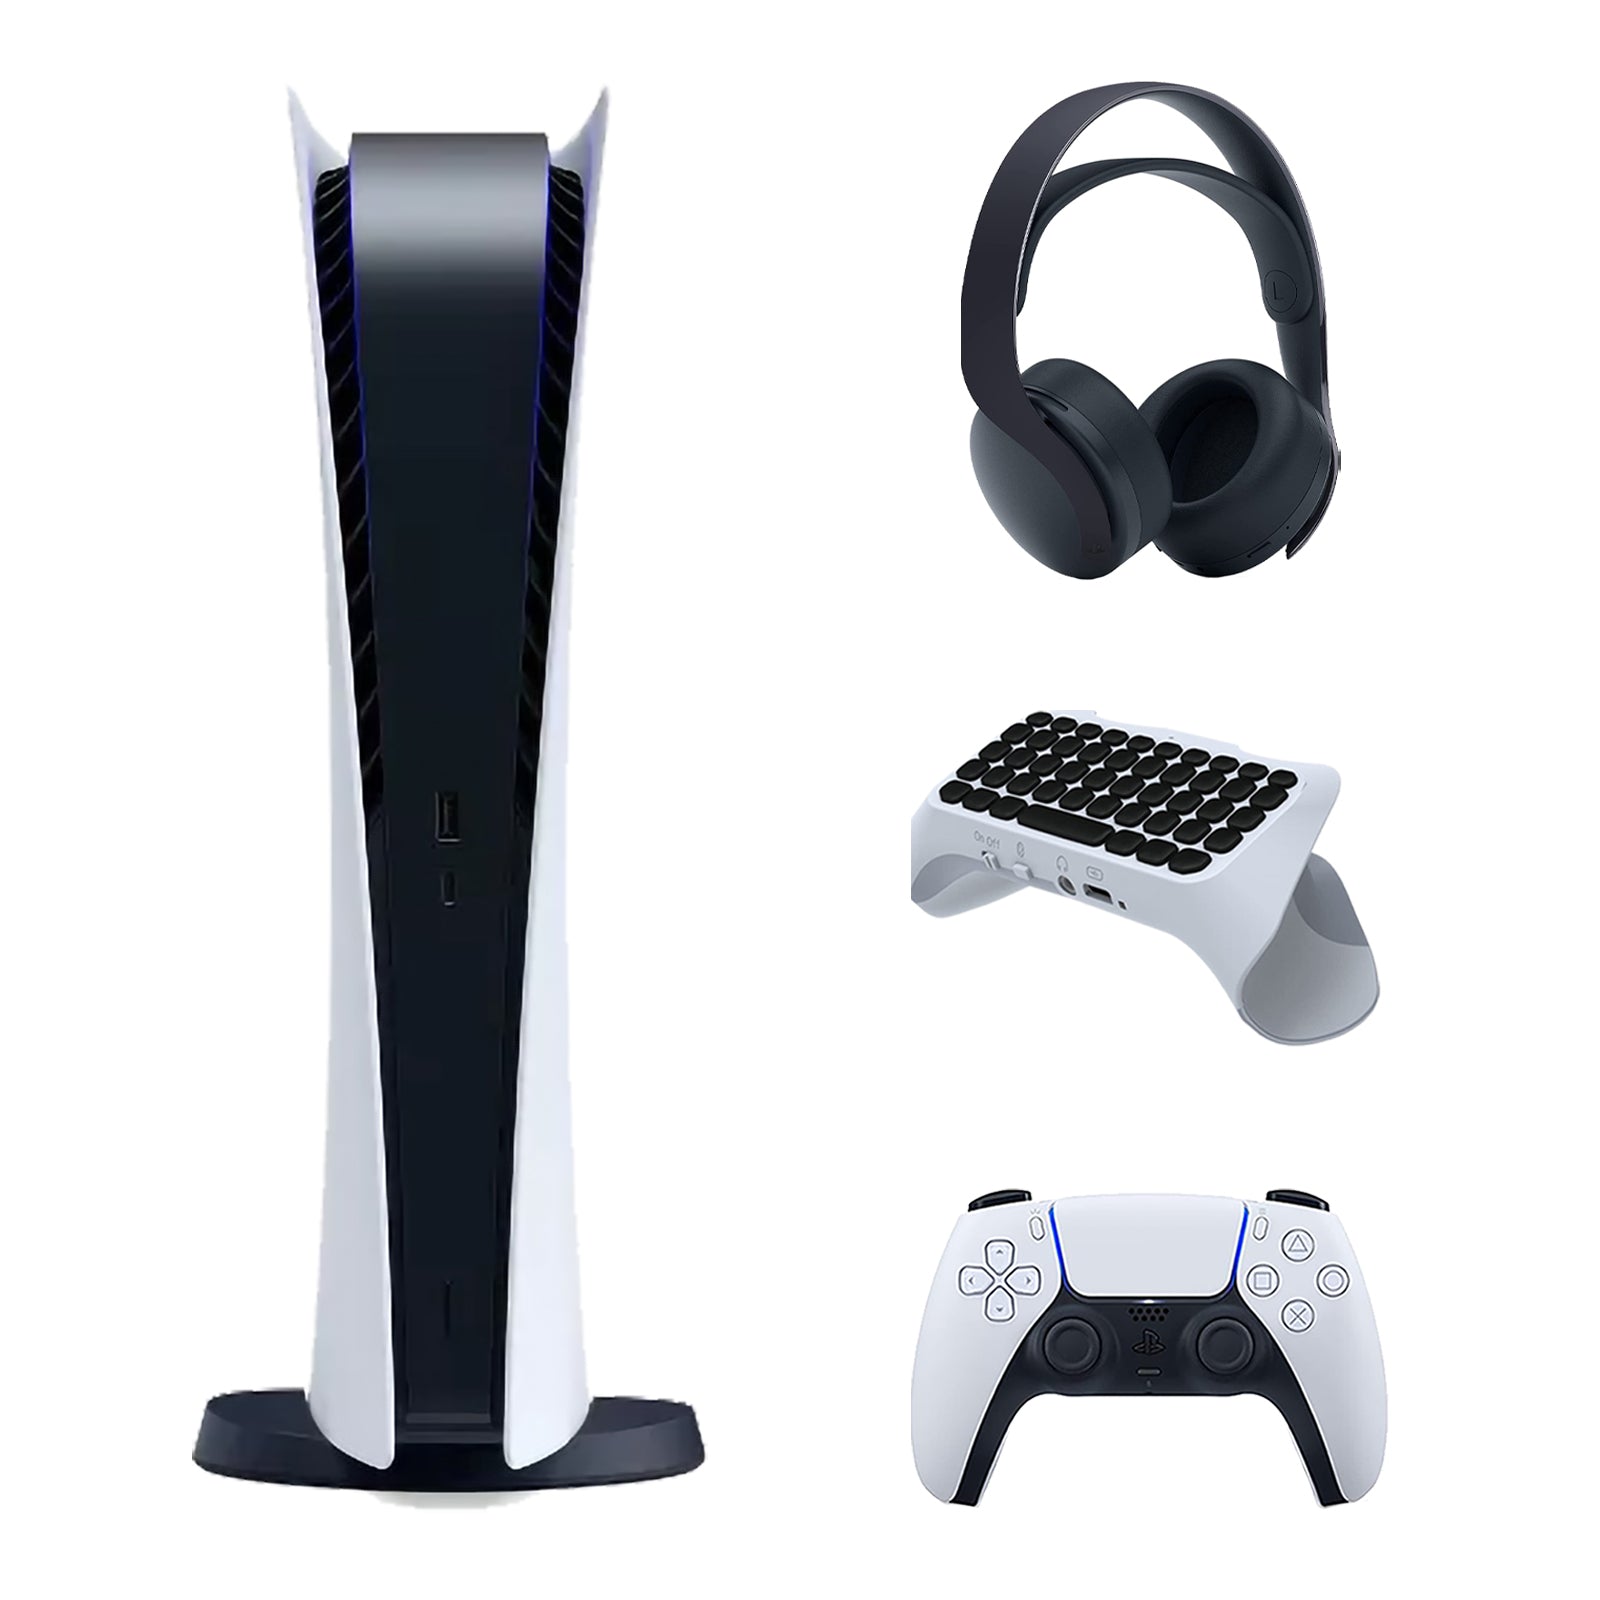 Sony Playstation 5 Digital Edition Console with Black PULSE 3D Wireless Gaming Headset and Surge QuickType 2.0 Wireless PS5 Controller Keypad - Pro-Distributing